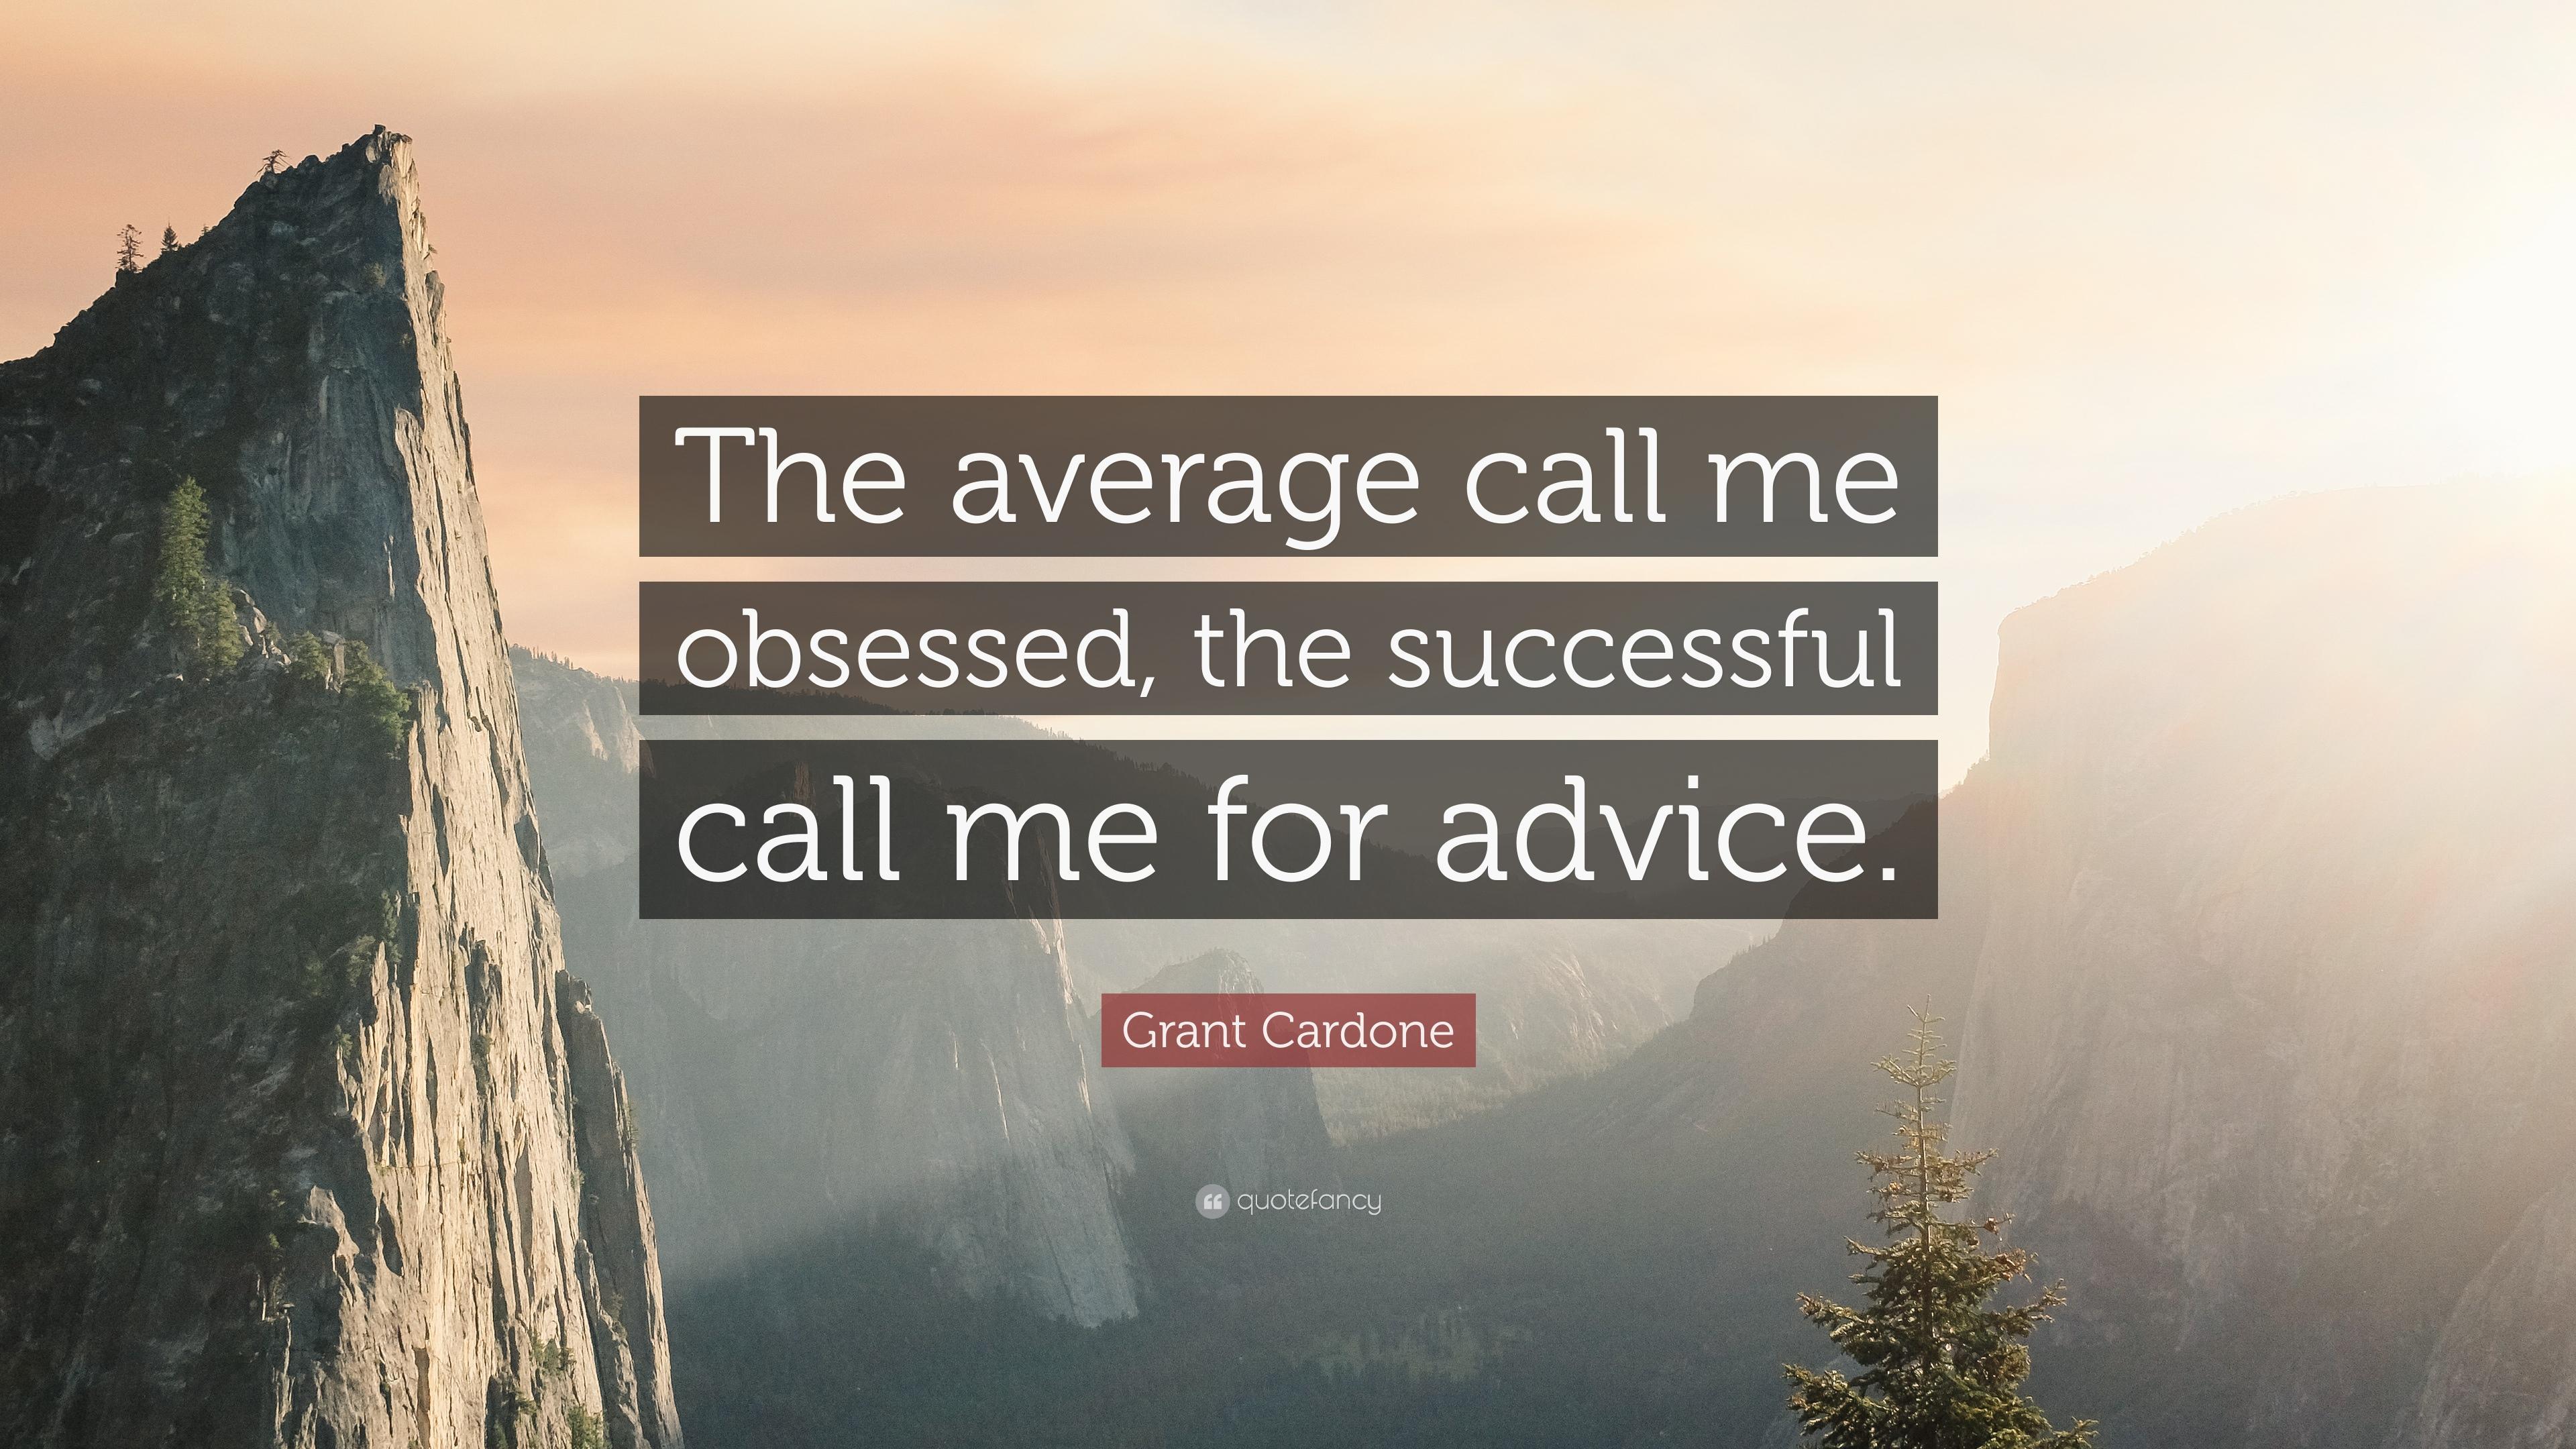 Grant Cardone Quote: “The average call me obsessed